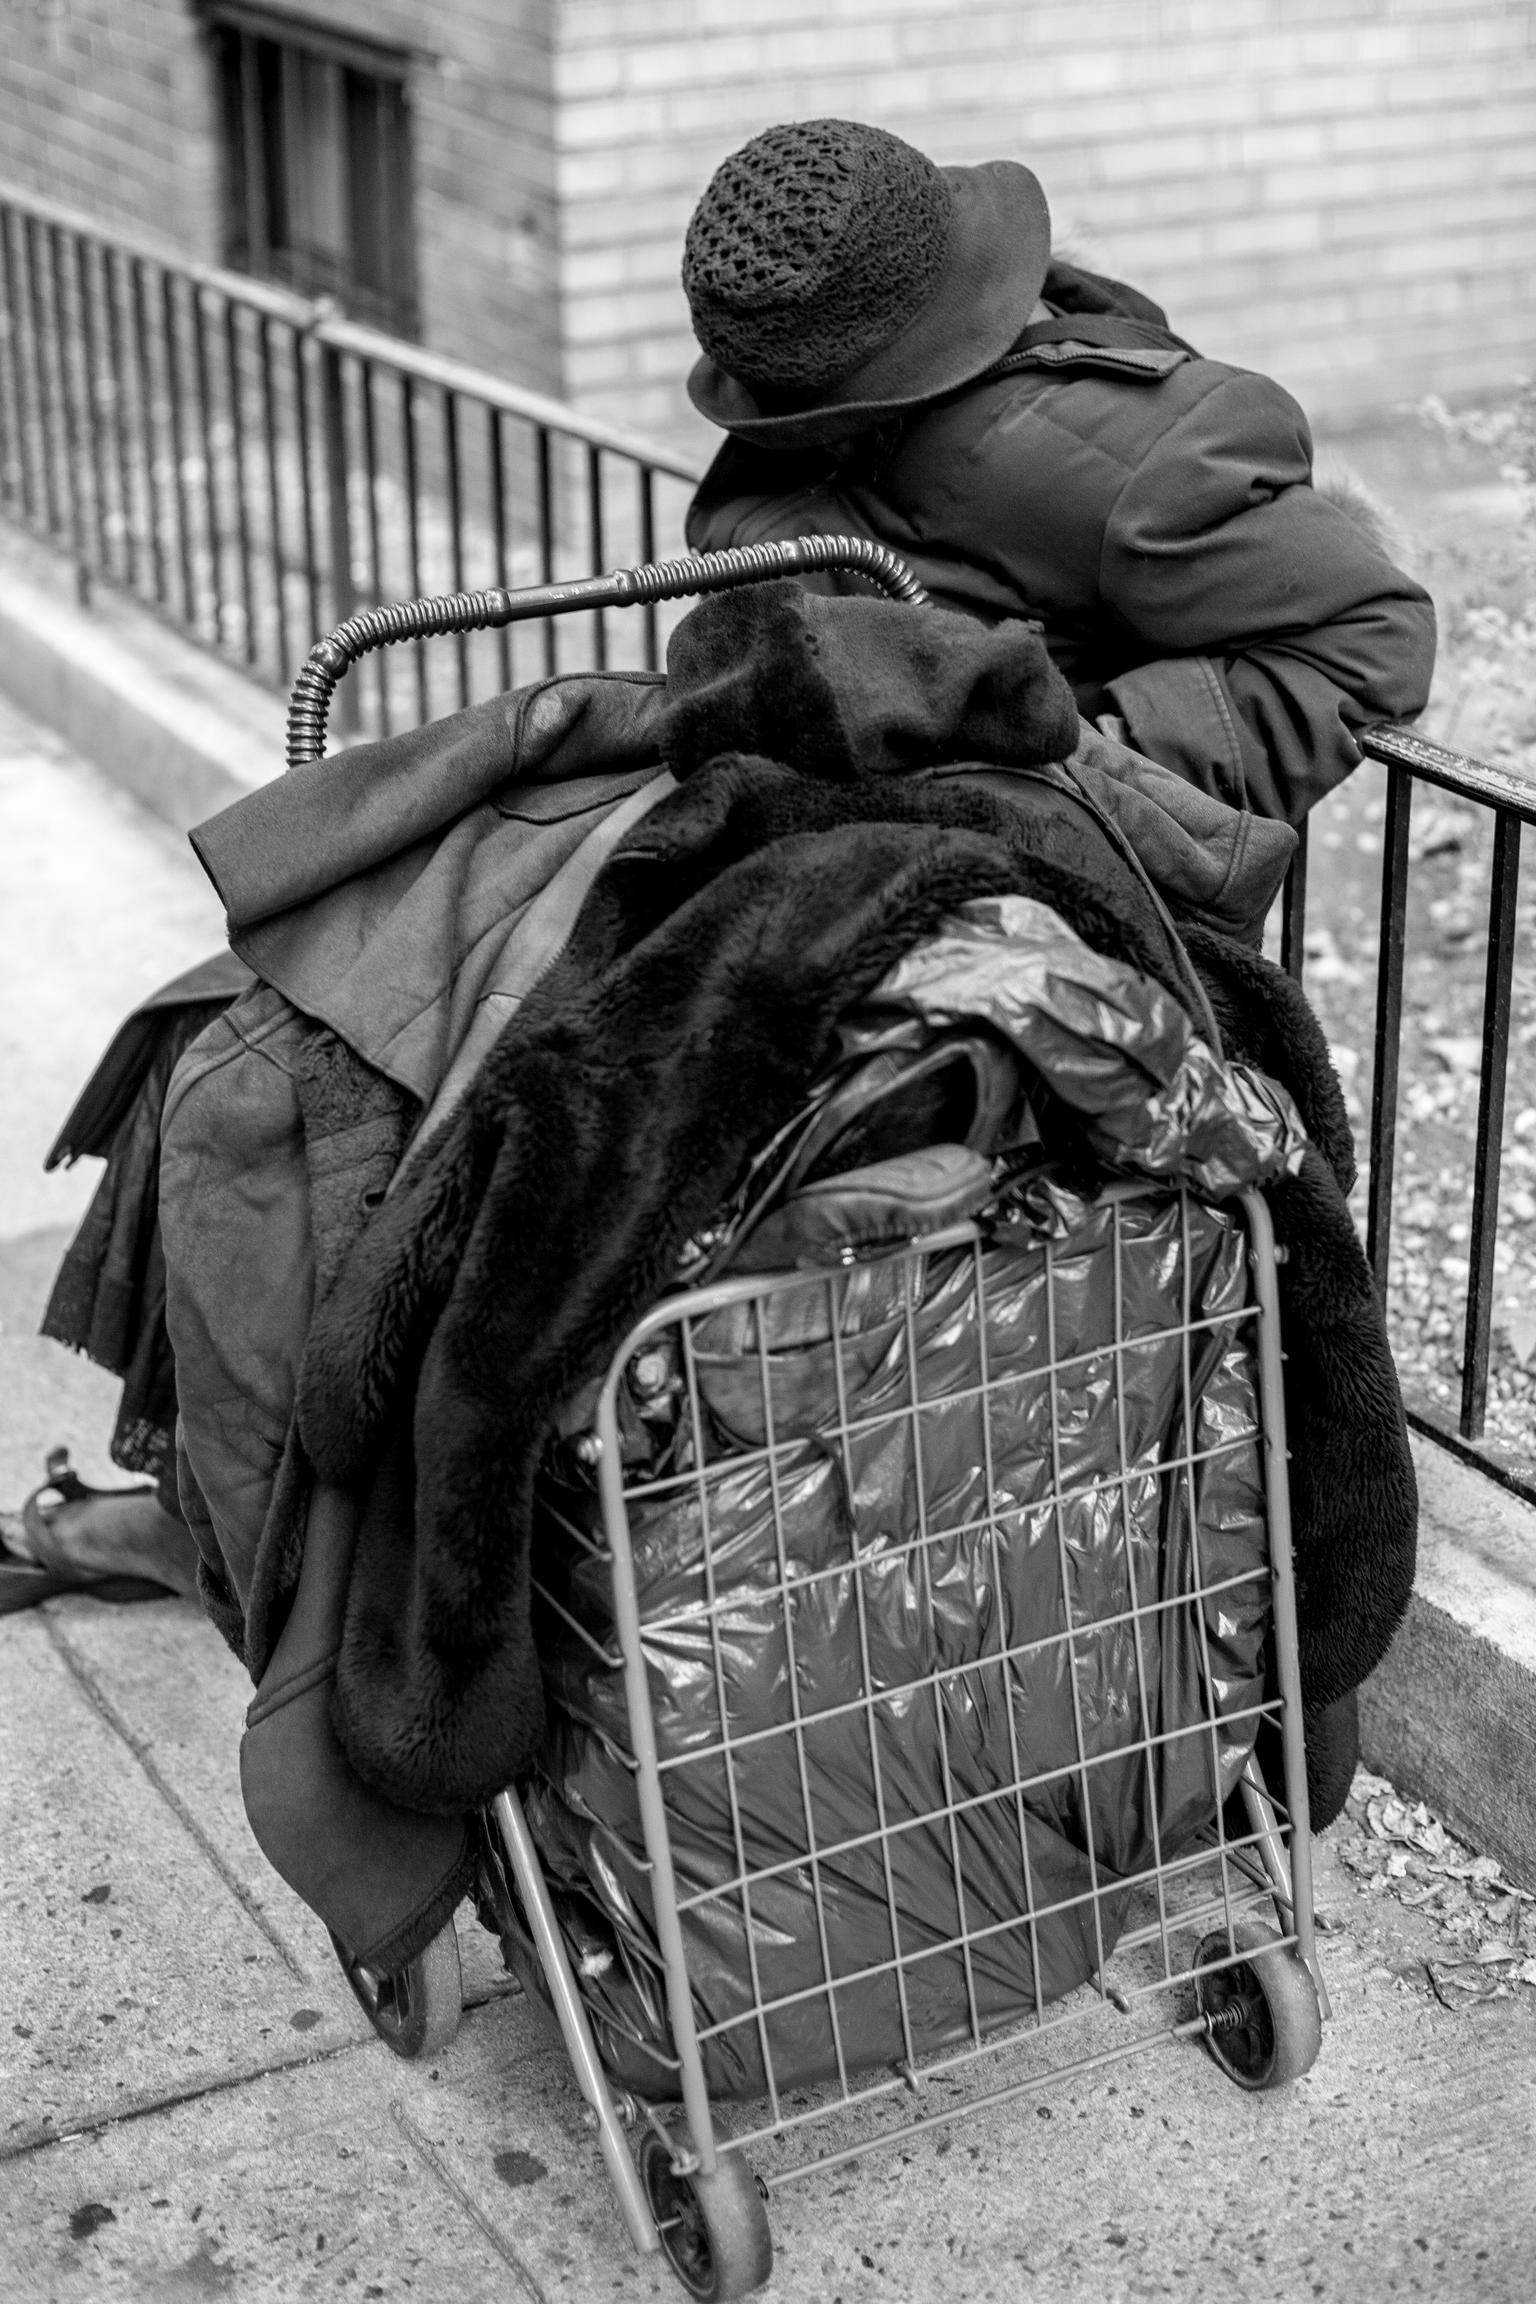 The sadness of living on the street in modern New York USA